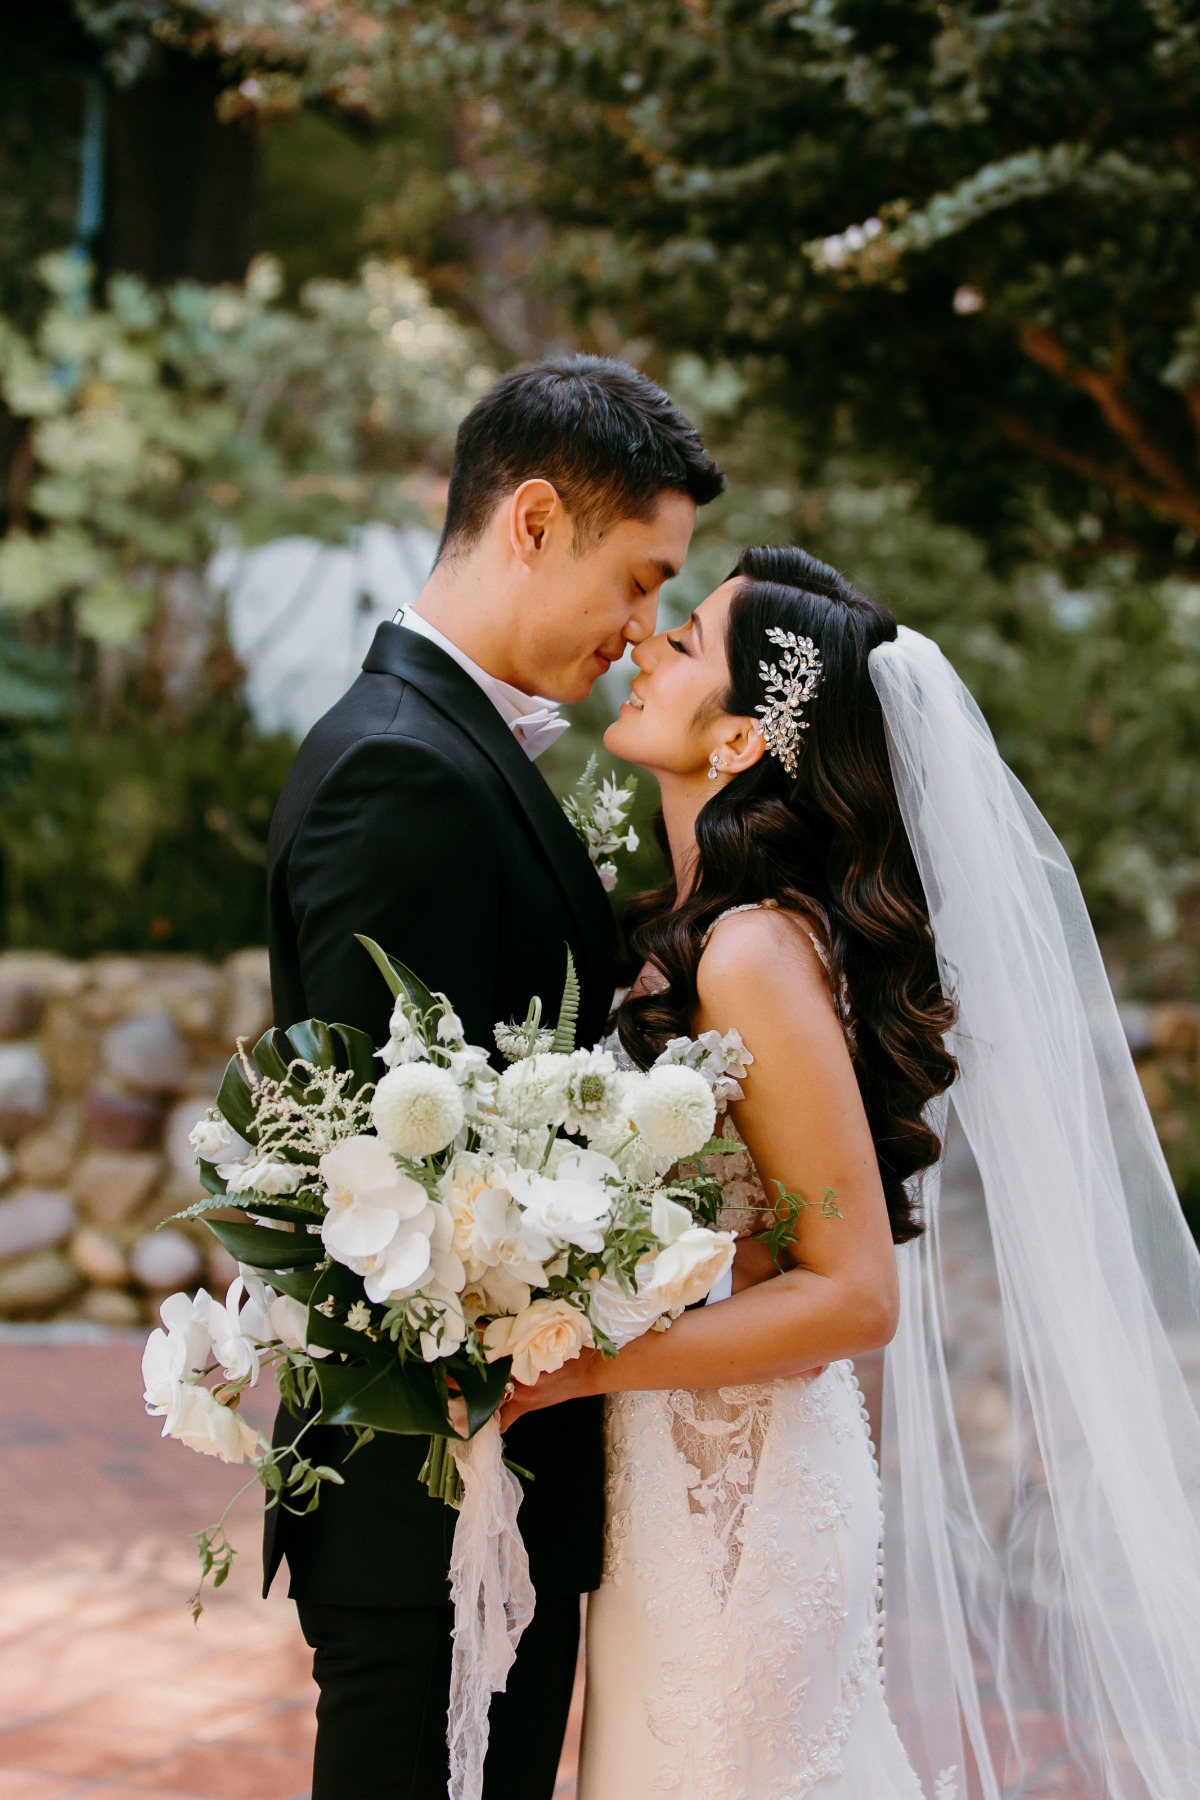 A Chic Outdoor Multicultural Wedding in California